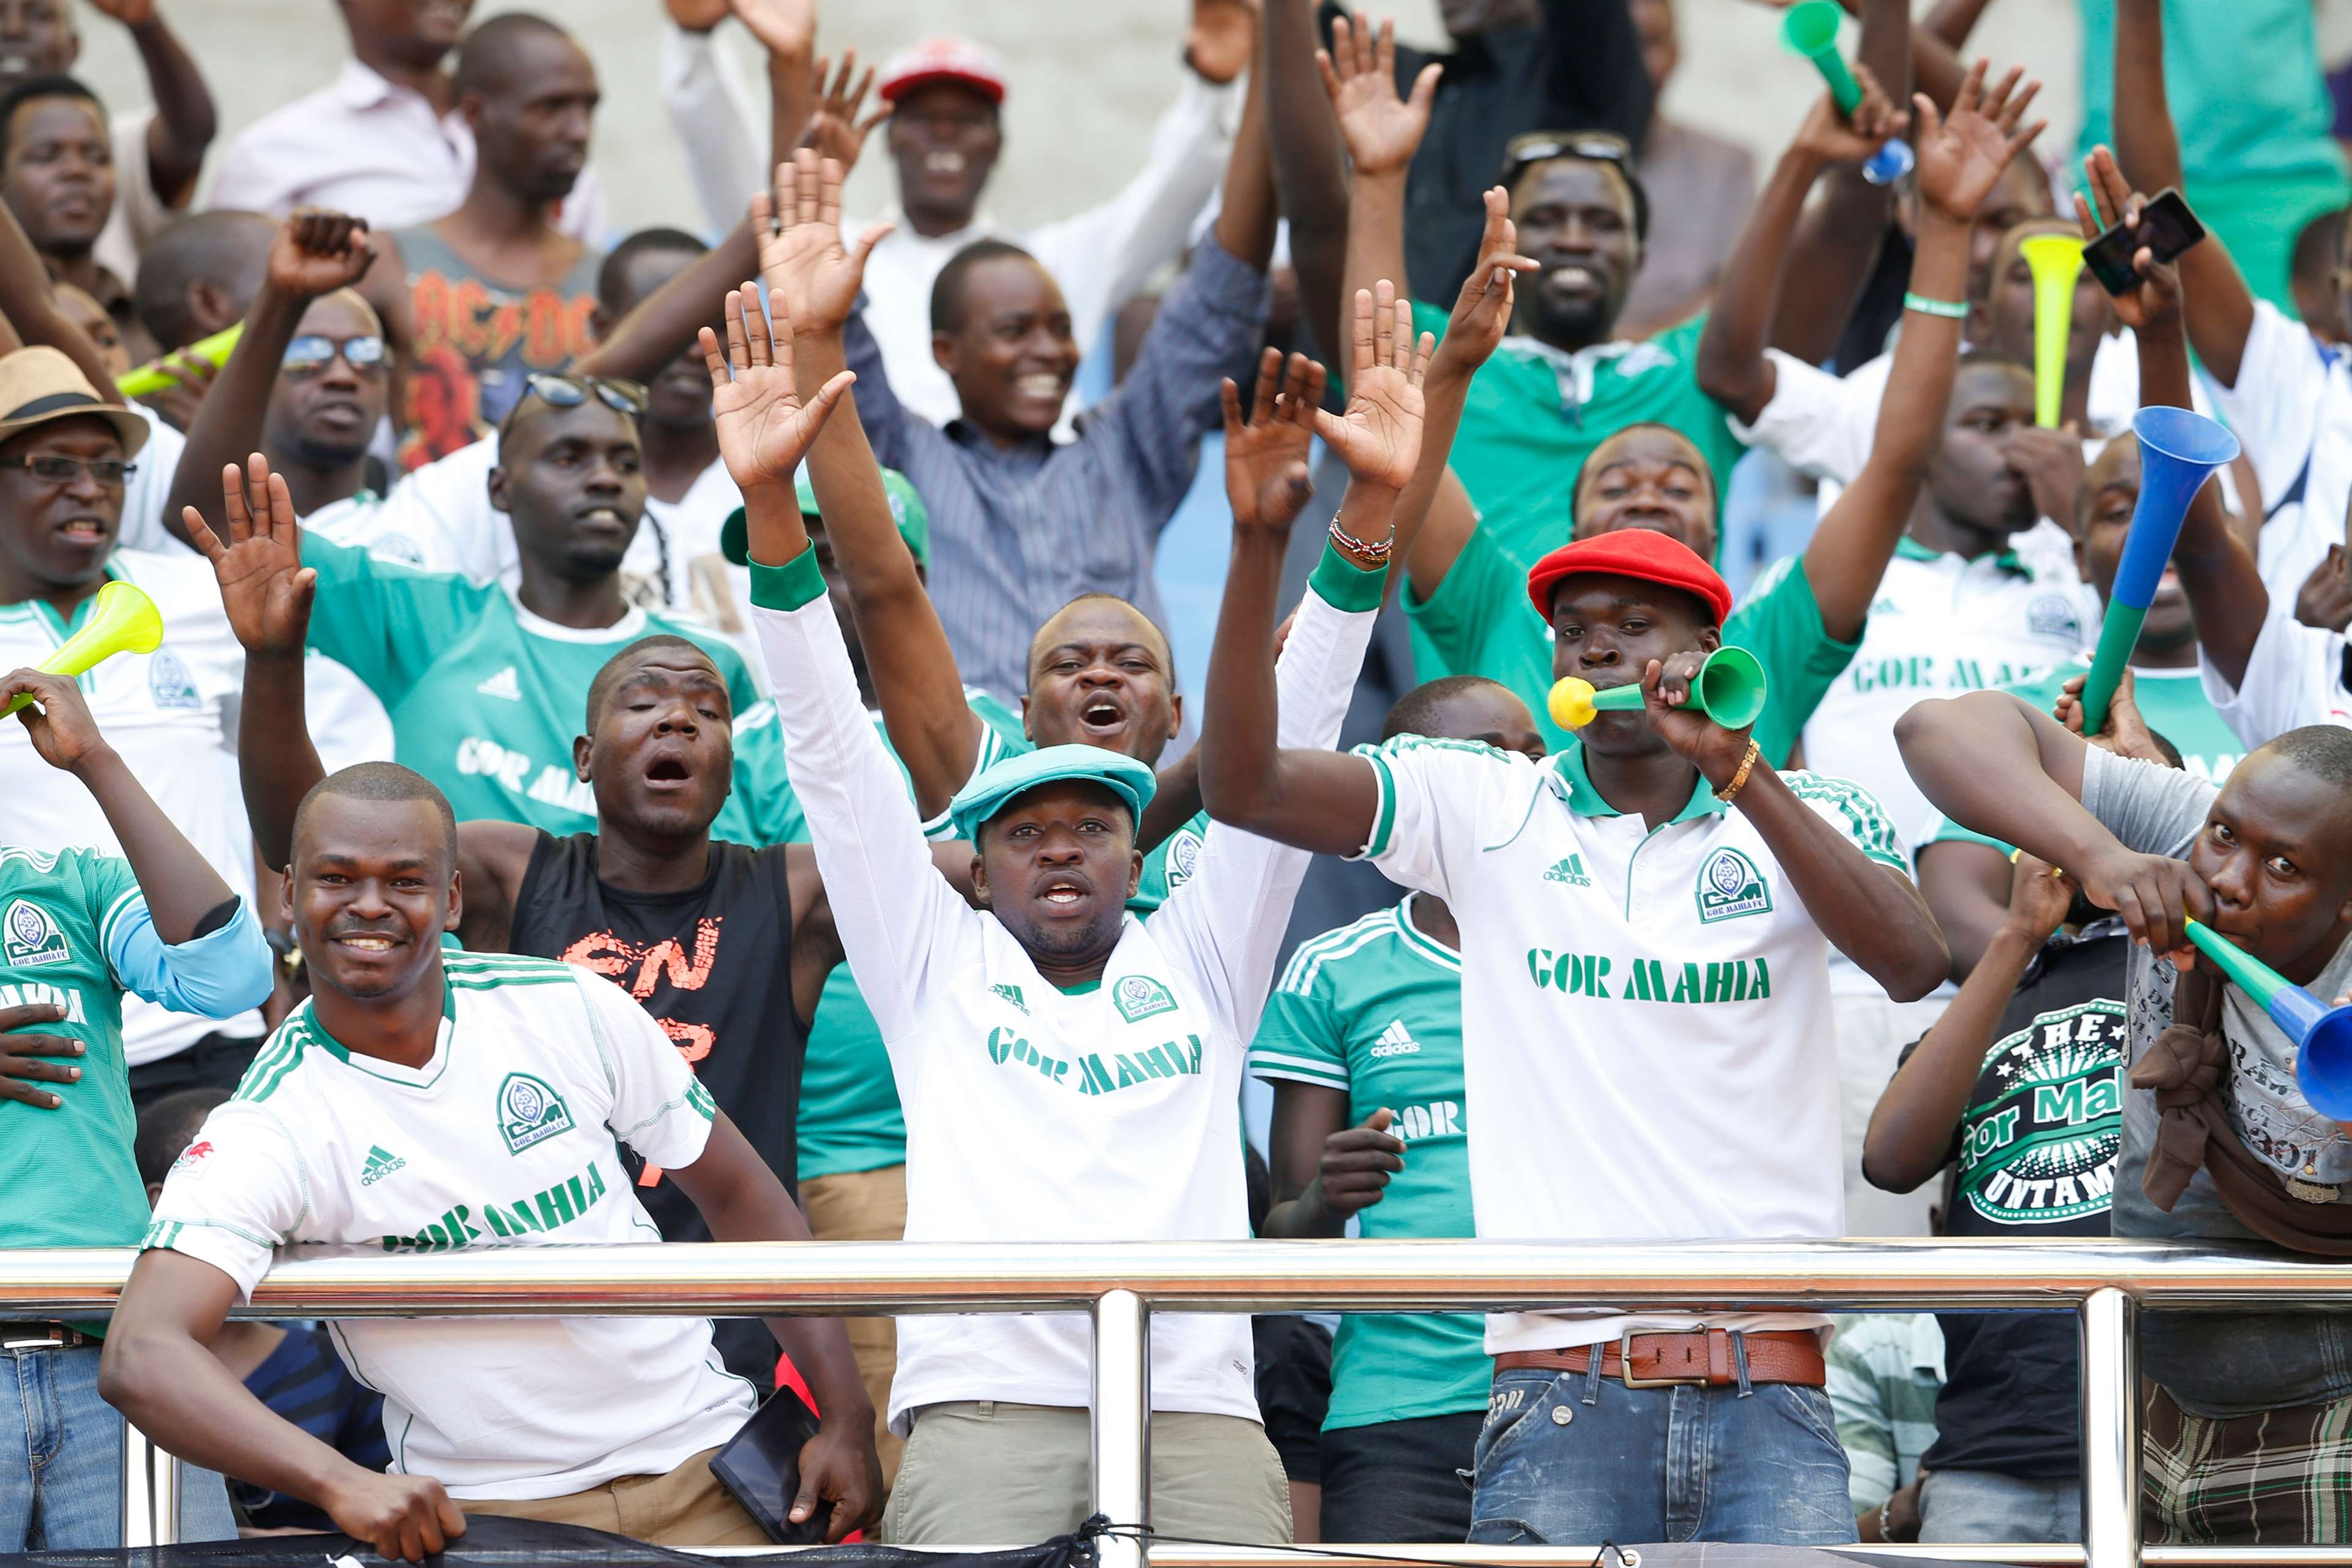 Gor Mahia fans have turned out in large numbers to cheer their team in Tanzania